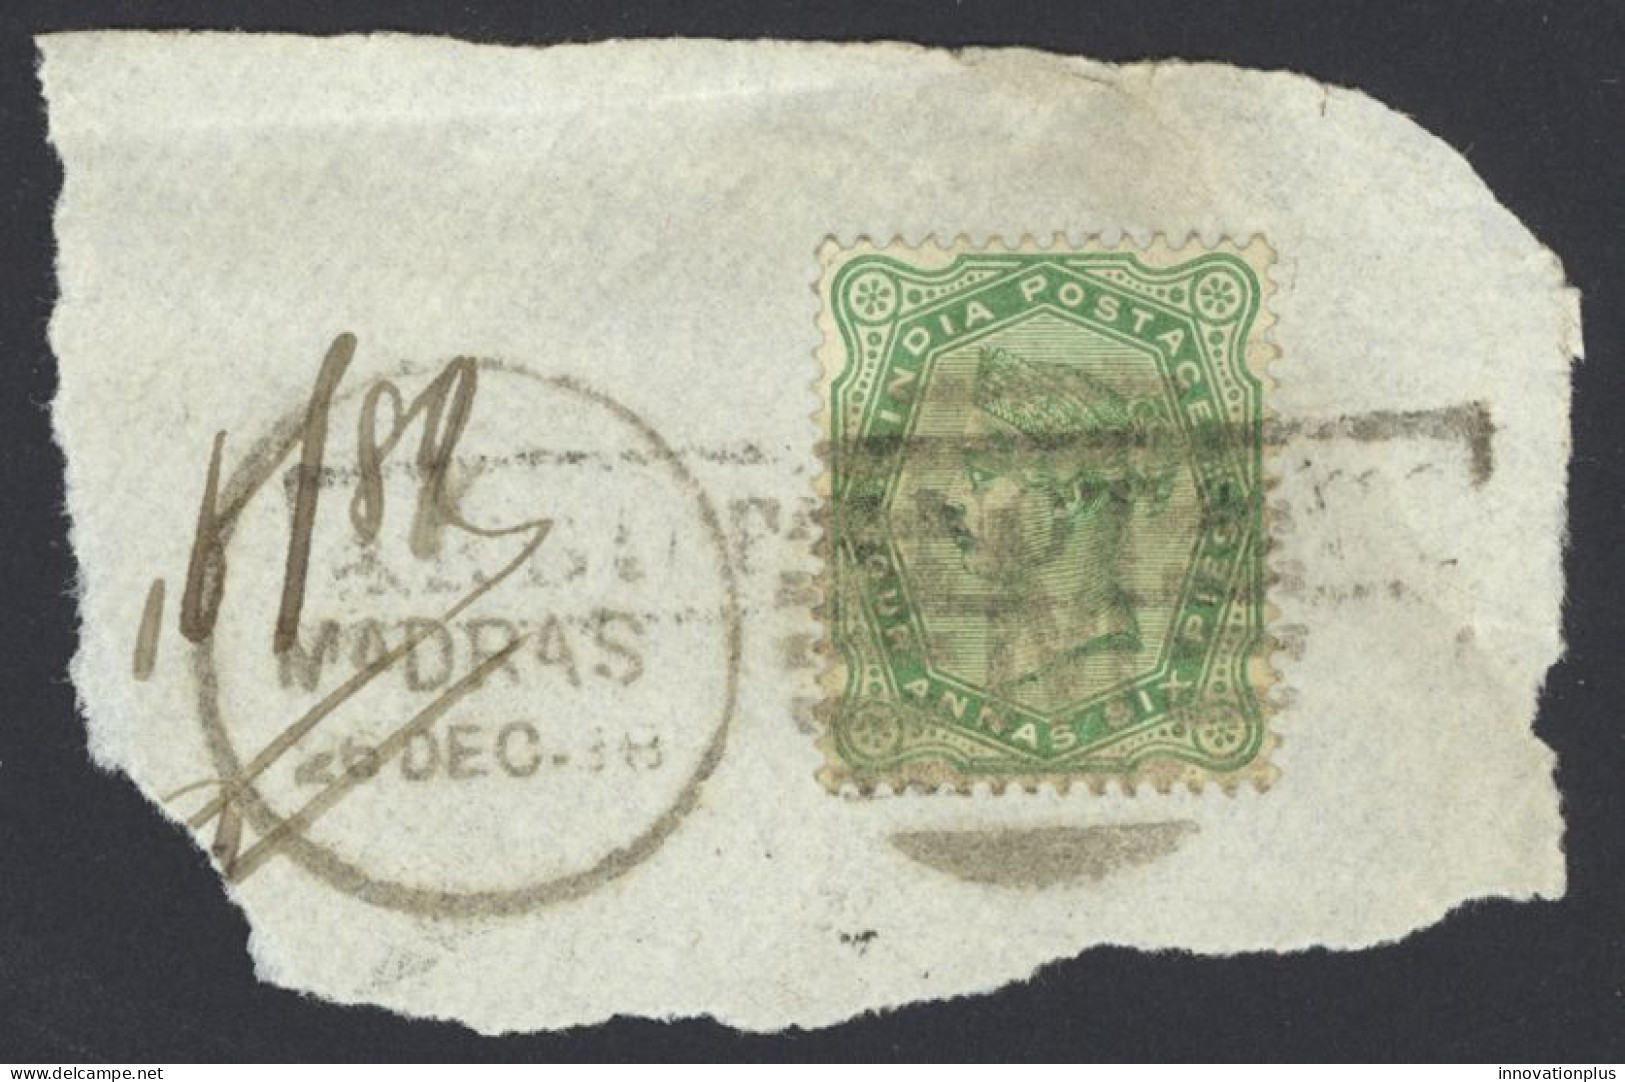 India Sc# 43 Used (b) On Cover Remnant (26DEC88) 1882-1887 4a6p Queen Victoria  - 1882-1901 Impero